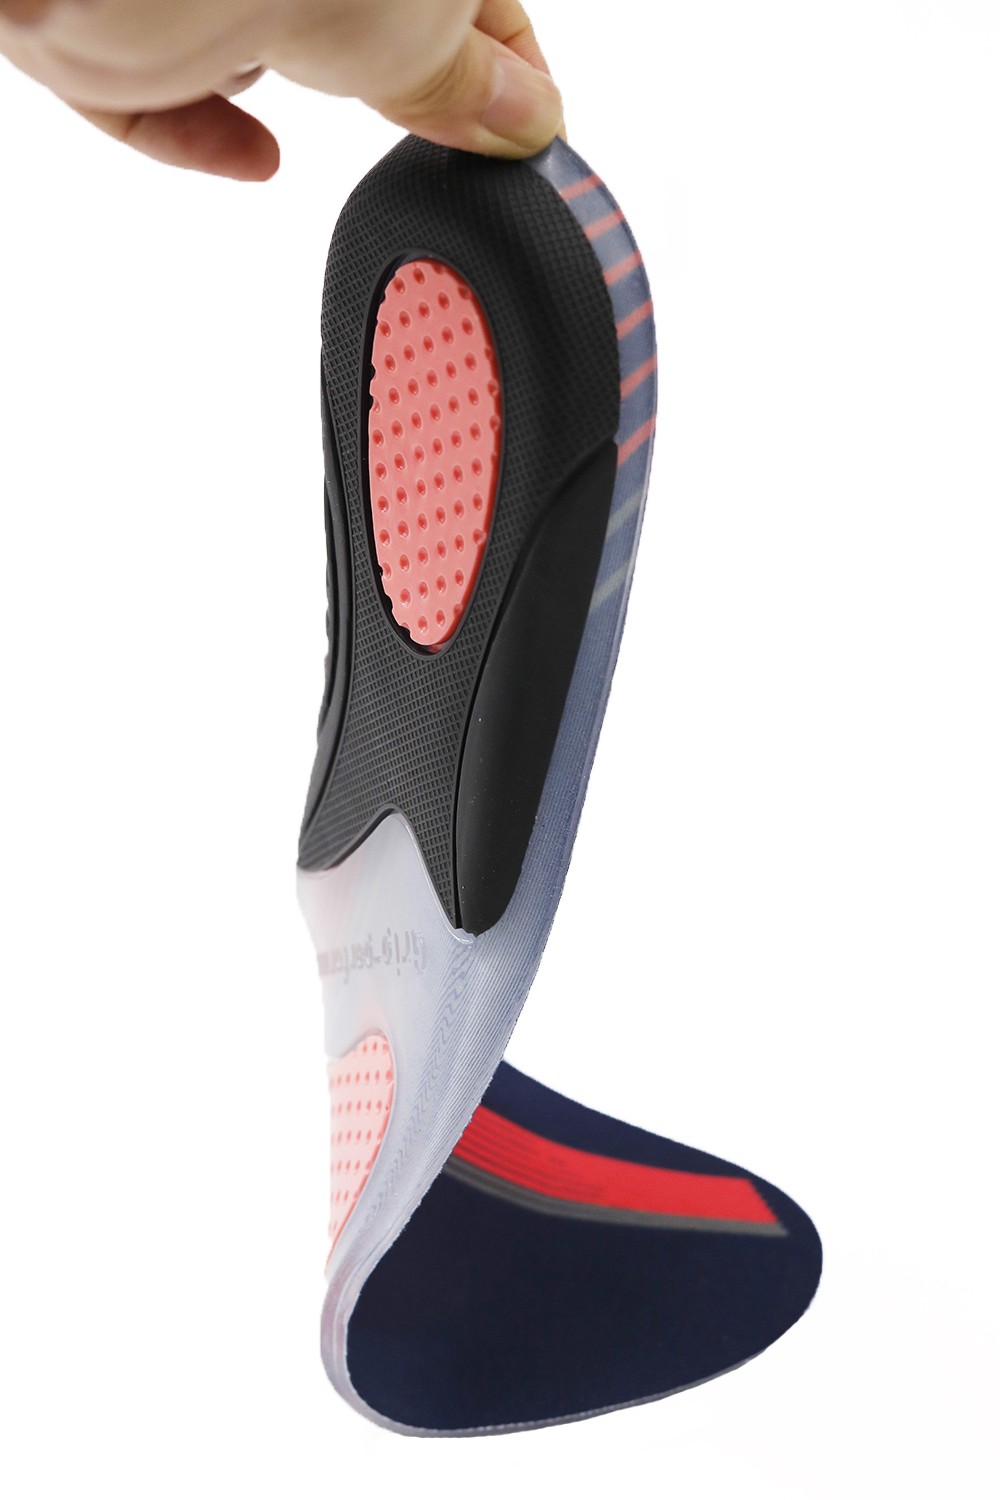 S-King stability gel insoles for running running for running shoes-5